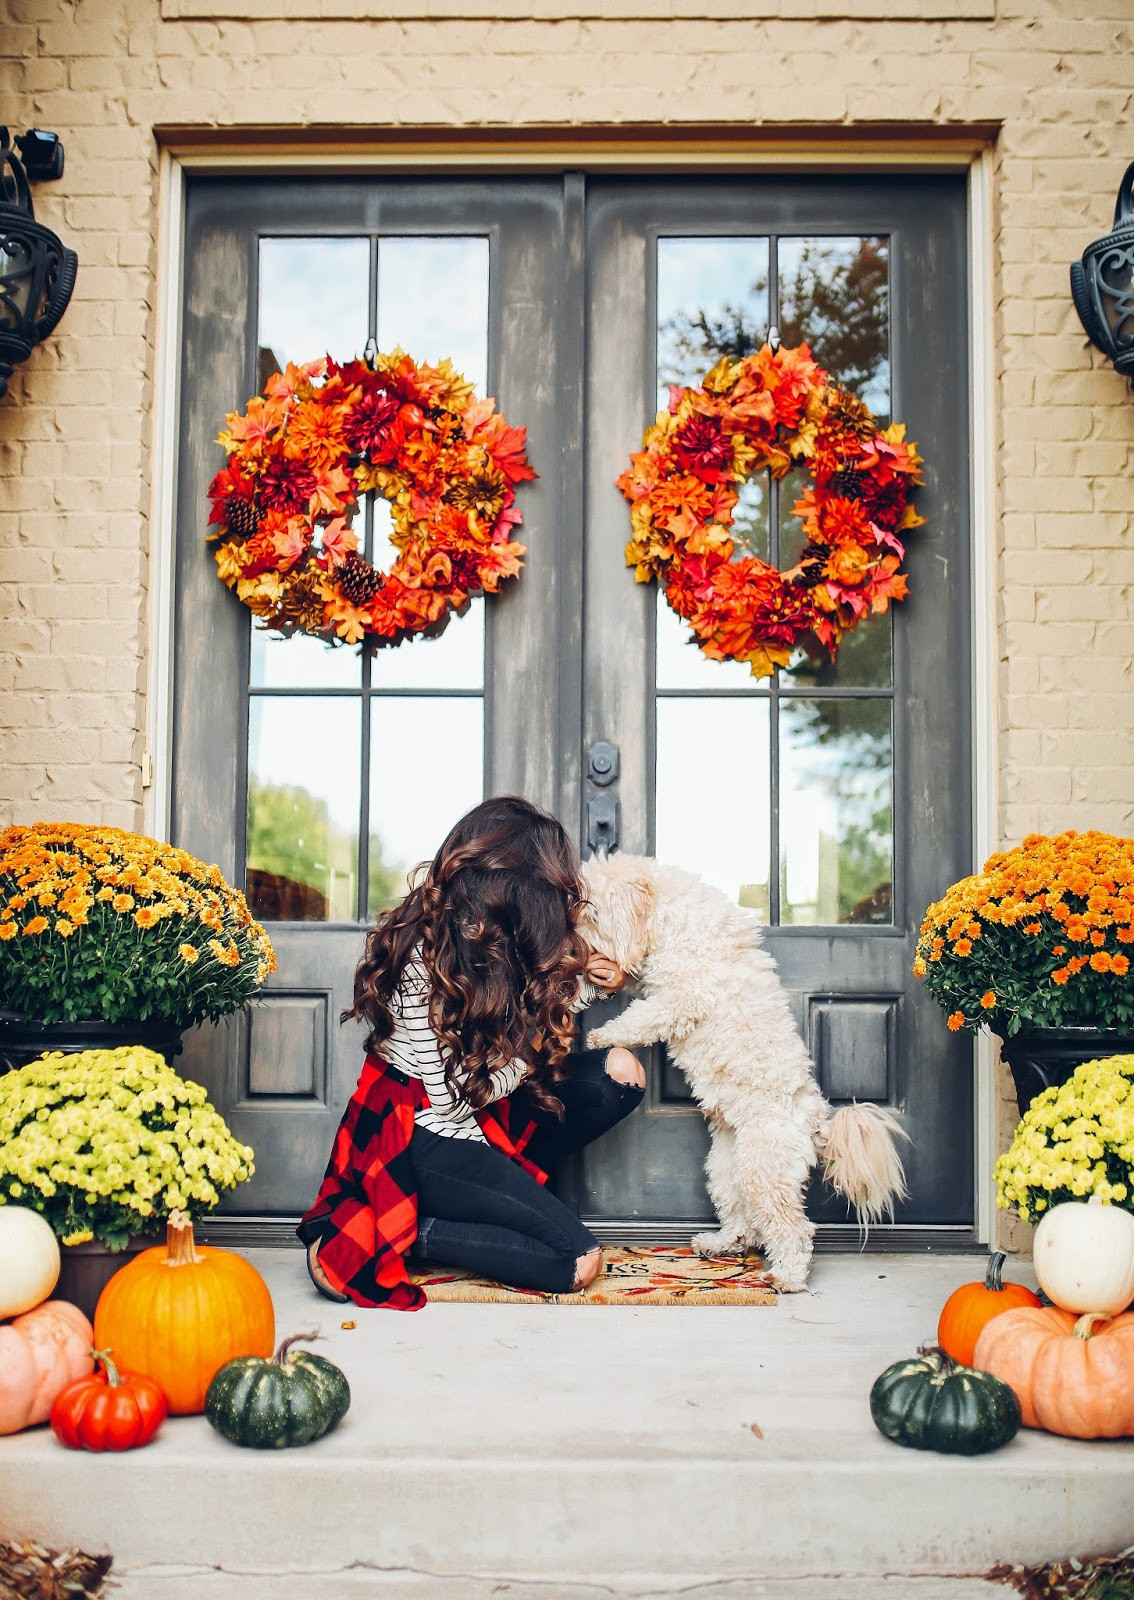 Front Porch Fall Decorating Ideas
 Our Fall Front Porch Decor